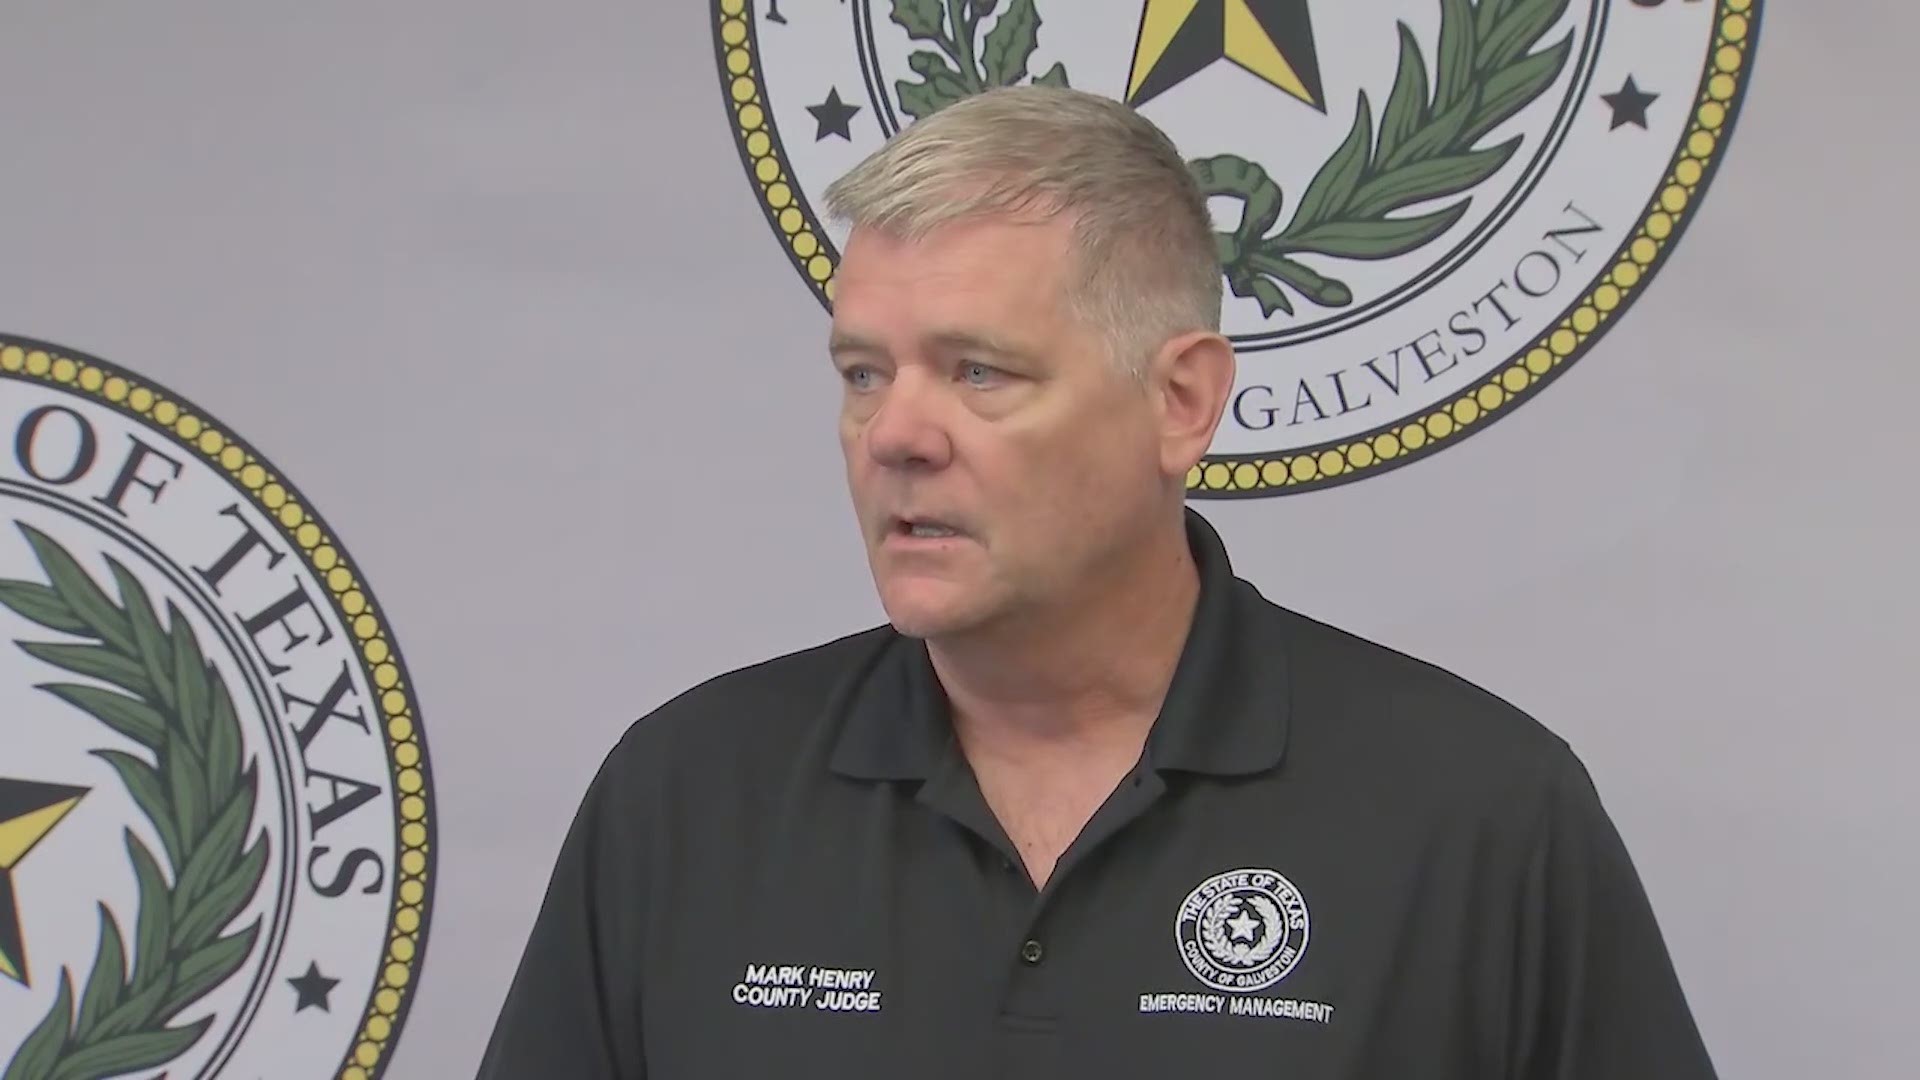 County Judge Mark Henry is providing the latest updates on Tropical Storm Beta and its expected impacts to Galveston County.